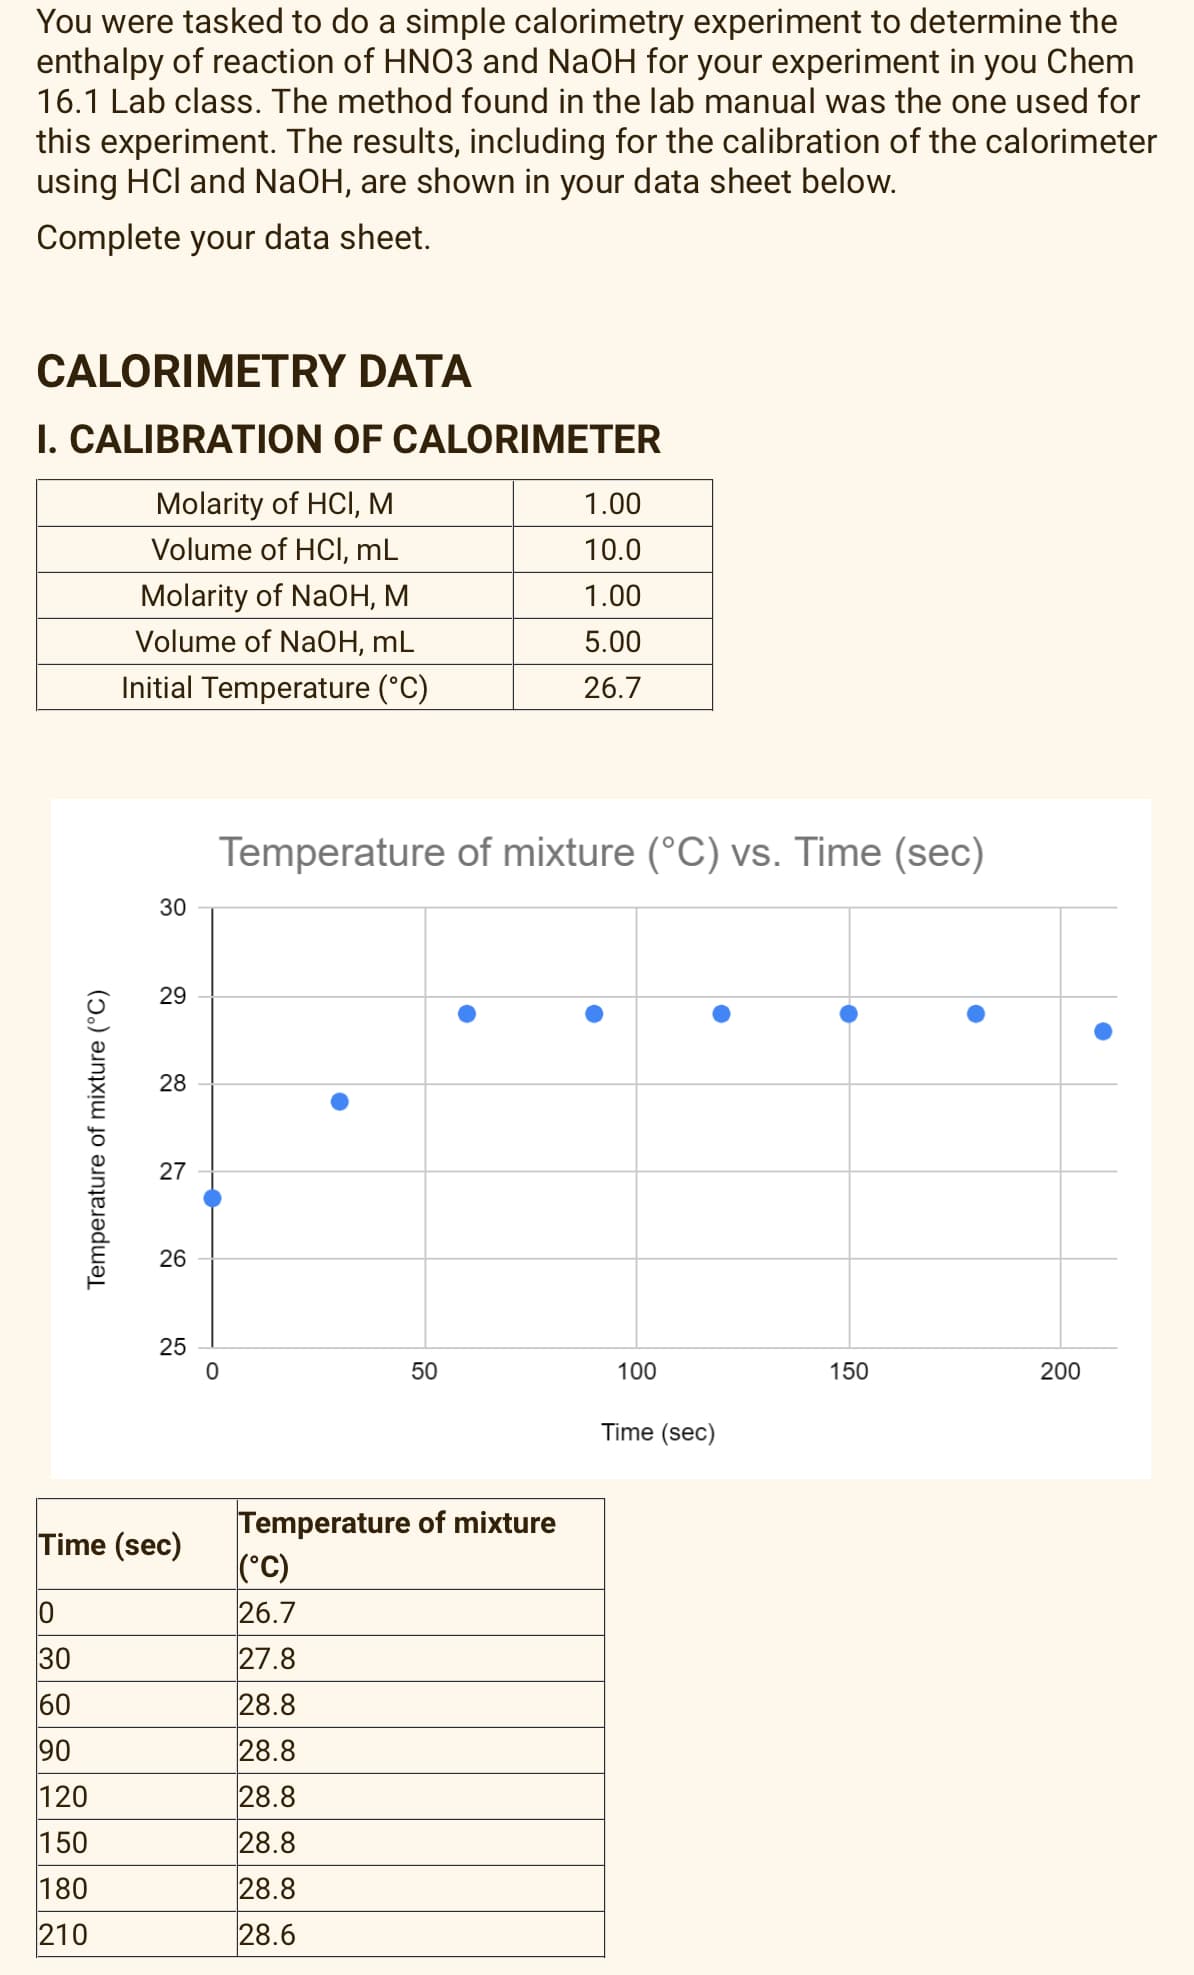 You were tasked to do a simple calorimetry experiment to determine the
enthalpy of reaction of HNO3 and NaOH for your experiment in you Chem
16.1 Lab class. The method found in the lab manual was the one used for
this experiment. The results, including for the calibration of the calorimeter
using HCl and NaOH, are shown in your data sheet below.
Complete your data sheet.
CALORIMETRY DATA
I. CALIBRATION OF CALORIMETER
Molarity of HCI, M
1.00
Volume of HCI, mL
10.0
Molarity of NaOH, M
1.00
Volume of NaOH, mL
5.00
Initial Temperature (°C)
26.7
Temperature of mixture (°C) vs. Time (sec)
30
29
28
27
26
25
50
100
150
200
Time (sec)
Temperature of mixture
|(°C)
26.7
Time (sec)
30
27.8
60
28.8
90
28.8
120
28.8
150
28.8
180
28.8
210
28.6
Temperature of mixture (°C)
